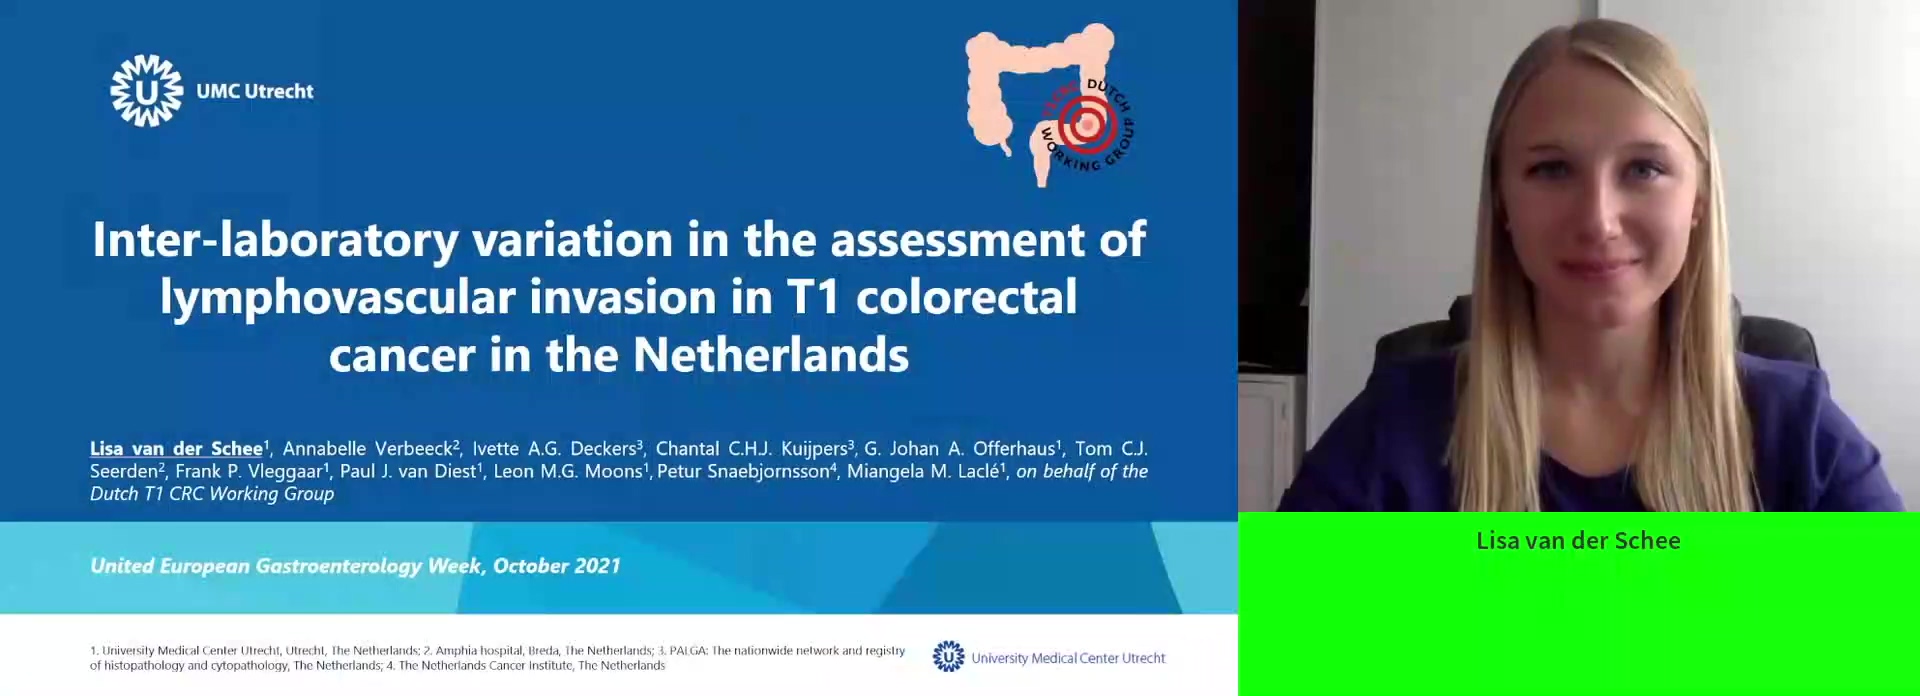 INTER-LABORATORY VARIATION IN THE ASSESSMENT OF LYMPHOVASCULAR INVASION IN T1 COLORECTAL CANCER IN THE NETHERLANDS